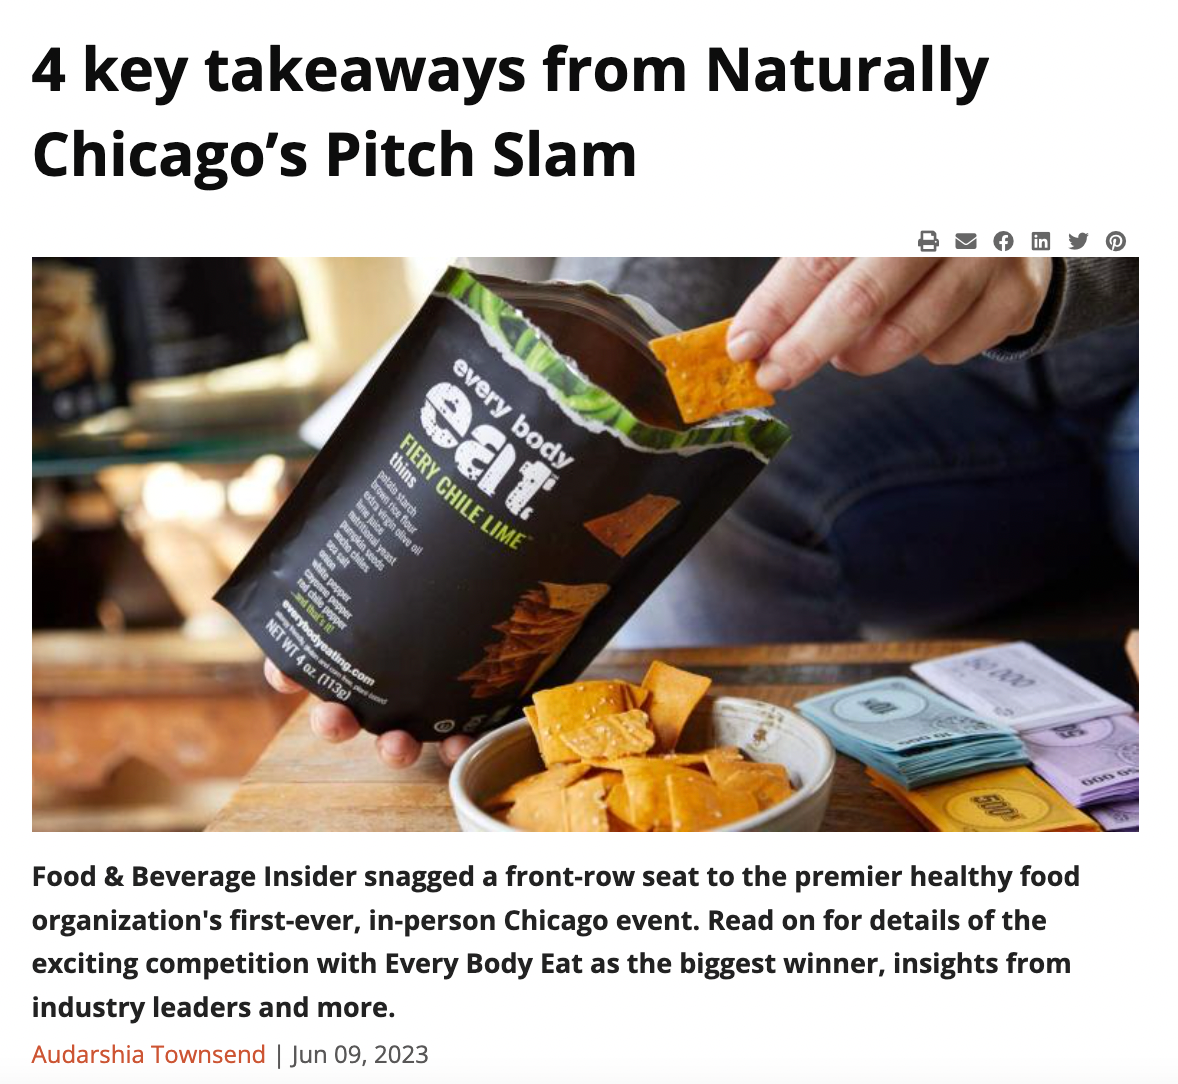 Food & Beverage Insider: 4 Key Takeaways from Naturally Chicago's Pitch Slam